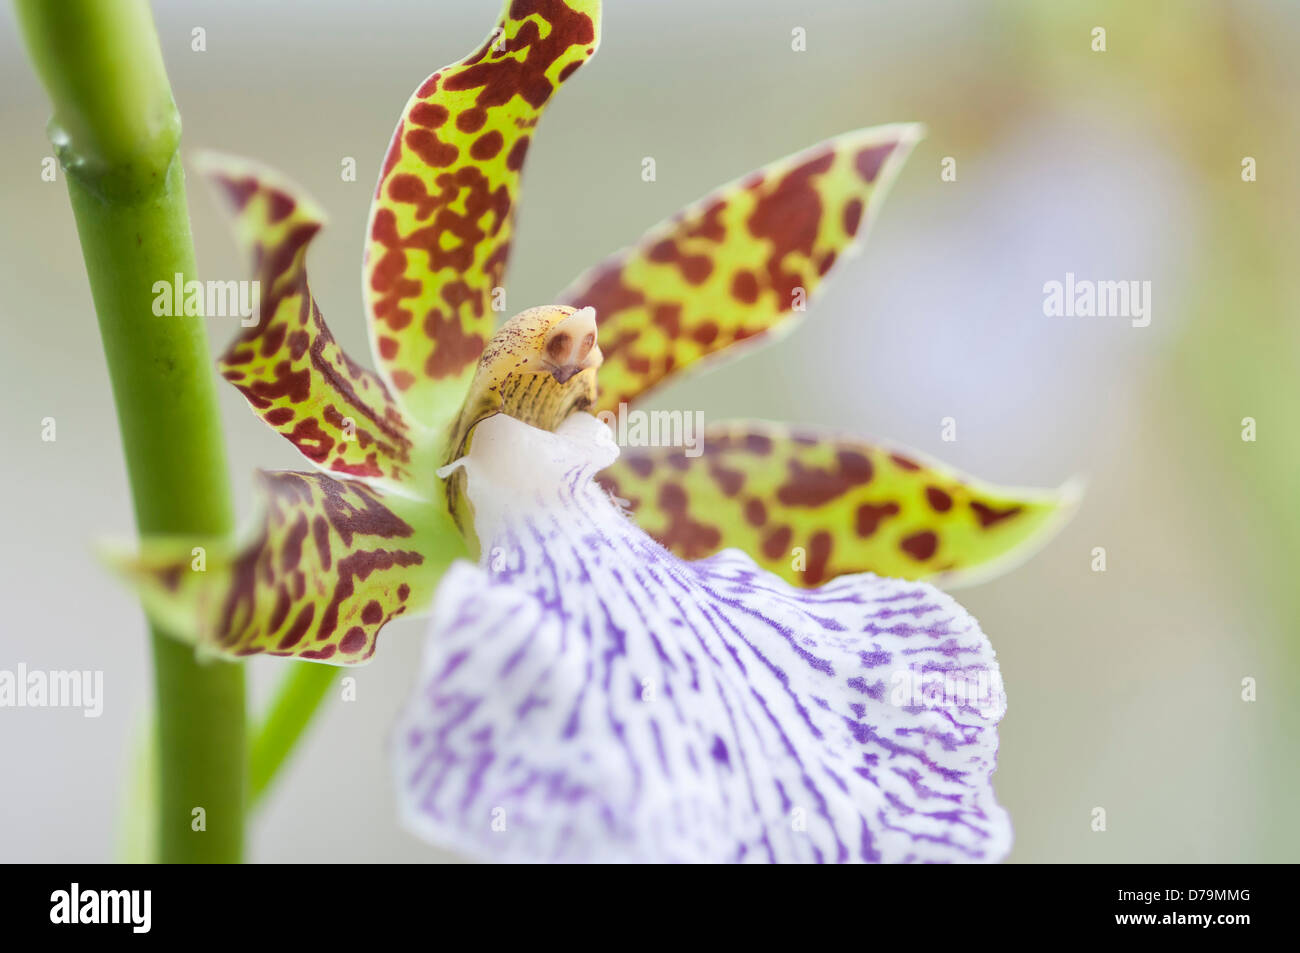 Flower of 'Heavenly Blue' Zygopetalum orchid with showy spotted patterned petals and lip in contrasting colours of red and green Stock Photo